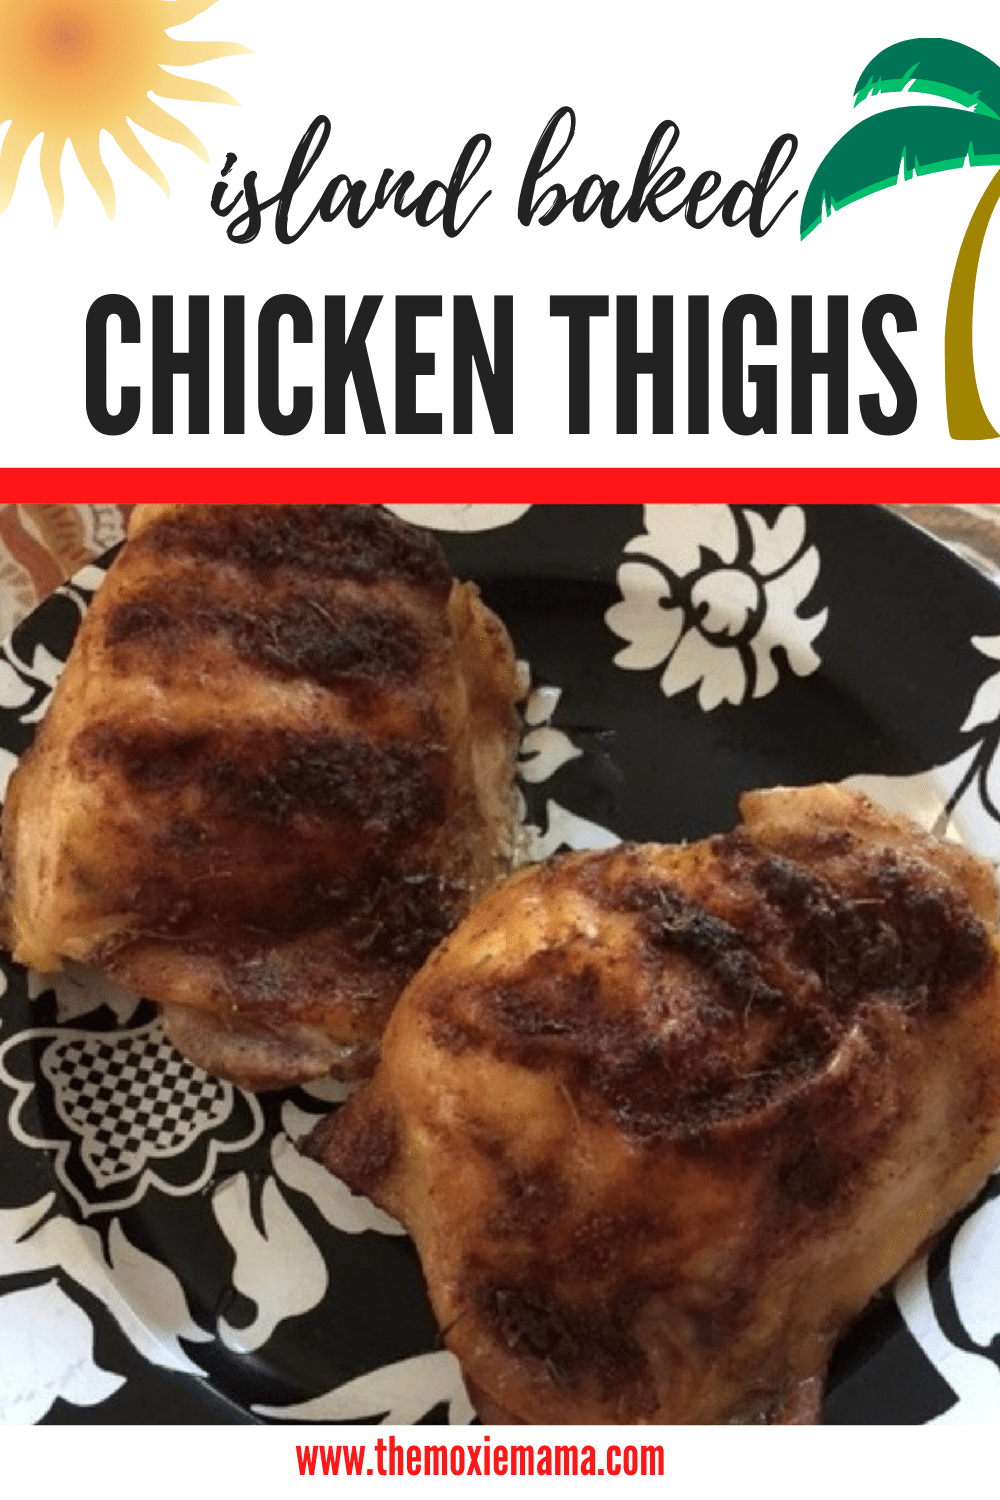 Recipe: Island Baked Chicken Thighs. Keto approved